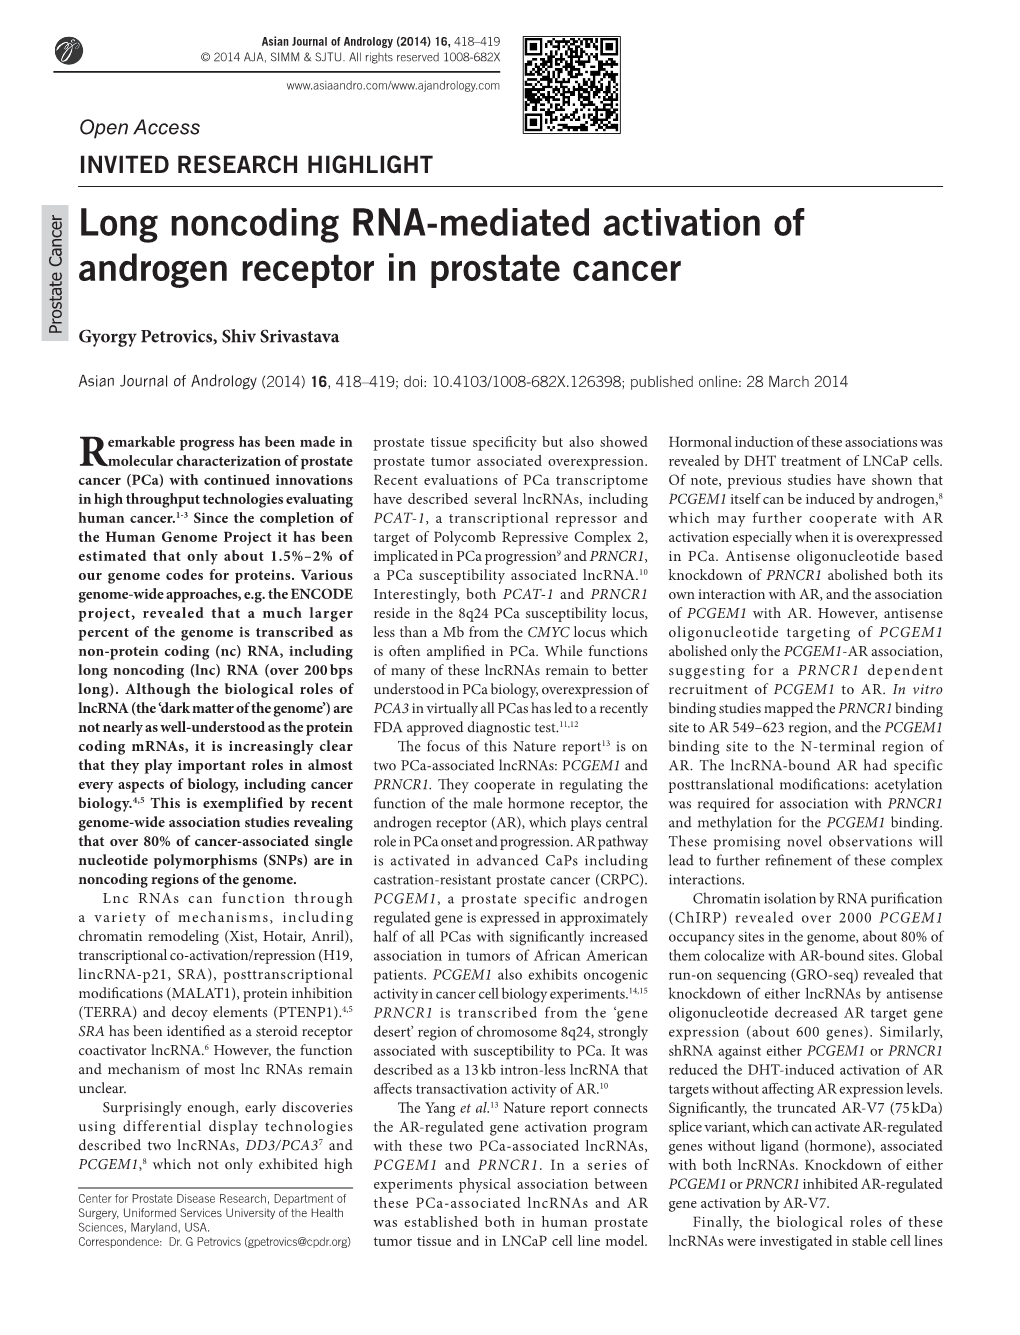 Long Noncoding RNA‑Mediated Activation of Androgen Receptor in Prostate Cancer